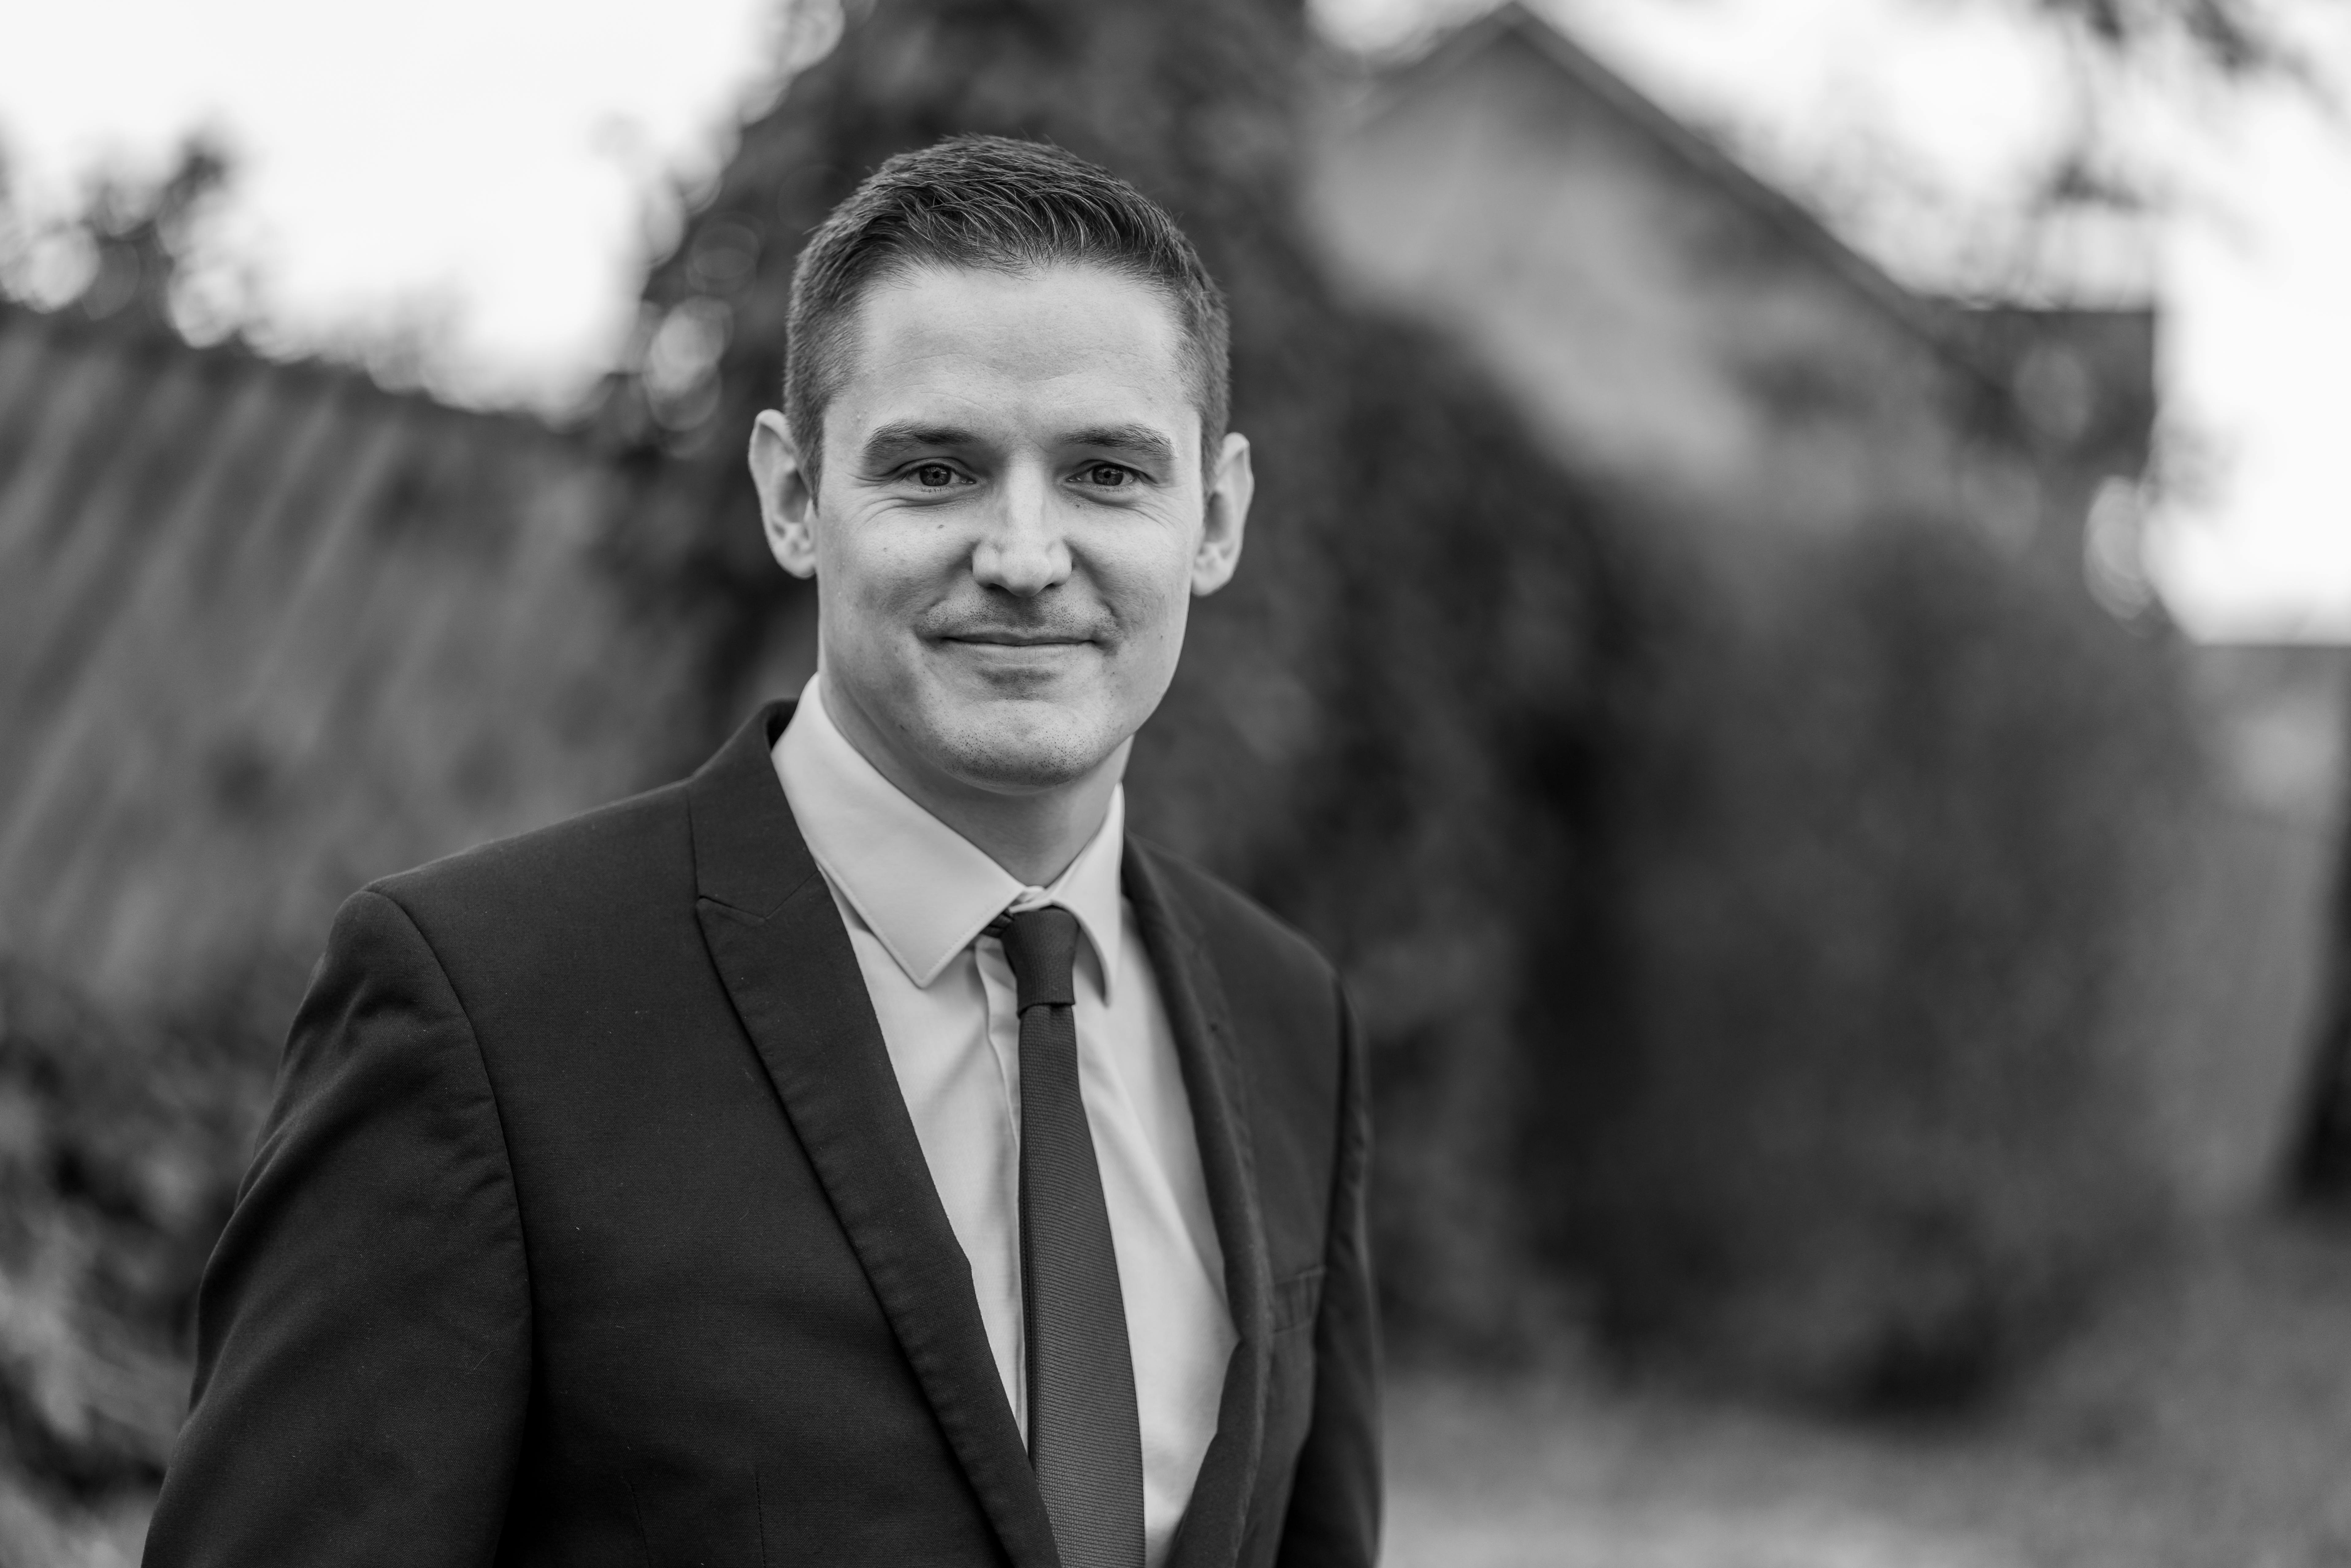 Richard Ince, financial planner for Lovewell Blake Financial Planning